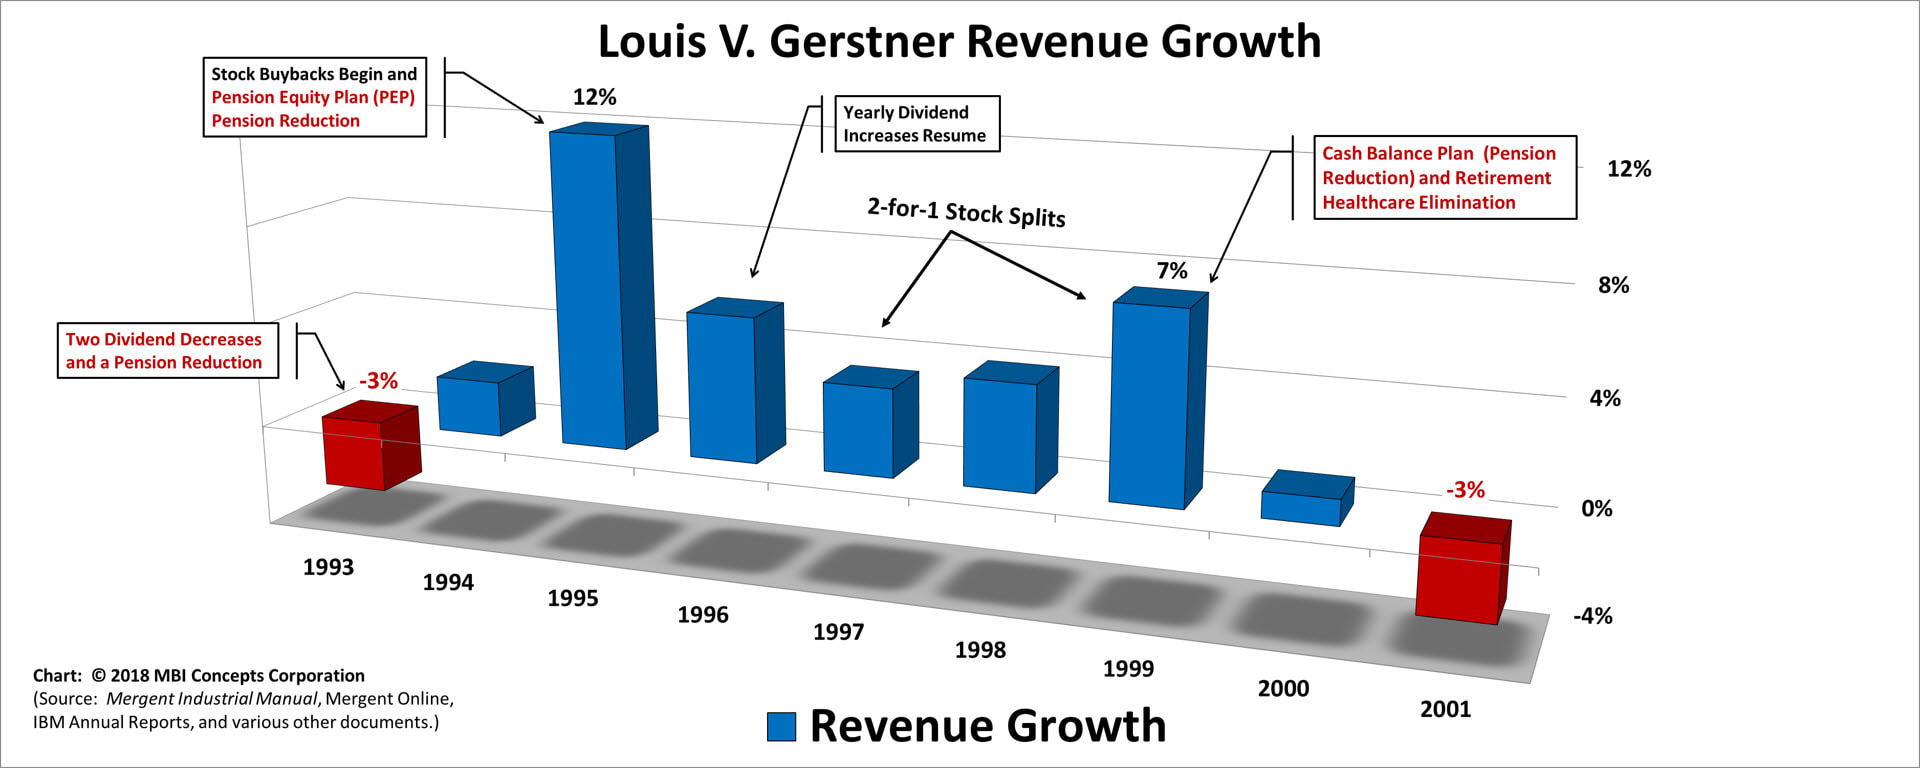 A color bar chart showing IBM's yearly revenue growth from 1993 to 2001 for Louis V. (Lou) Gerstner